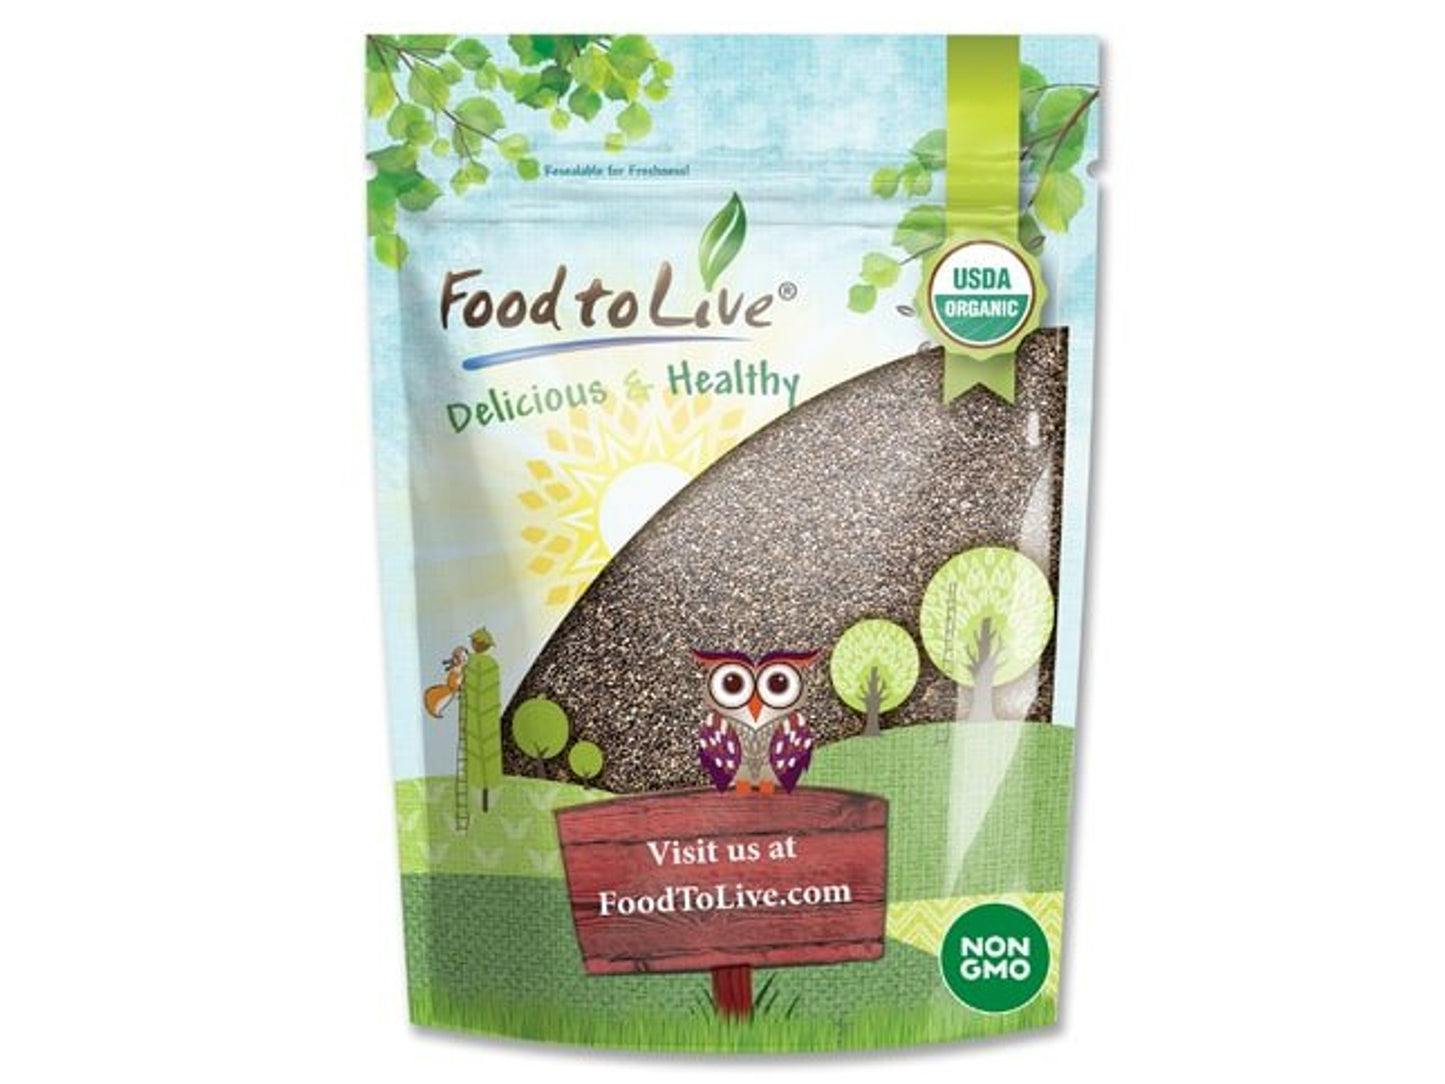 Organic Chia Seeds — Black, Vegan, Kosher, Non-GMO, Great for Smoothies, Sirtfood - by Food to Live